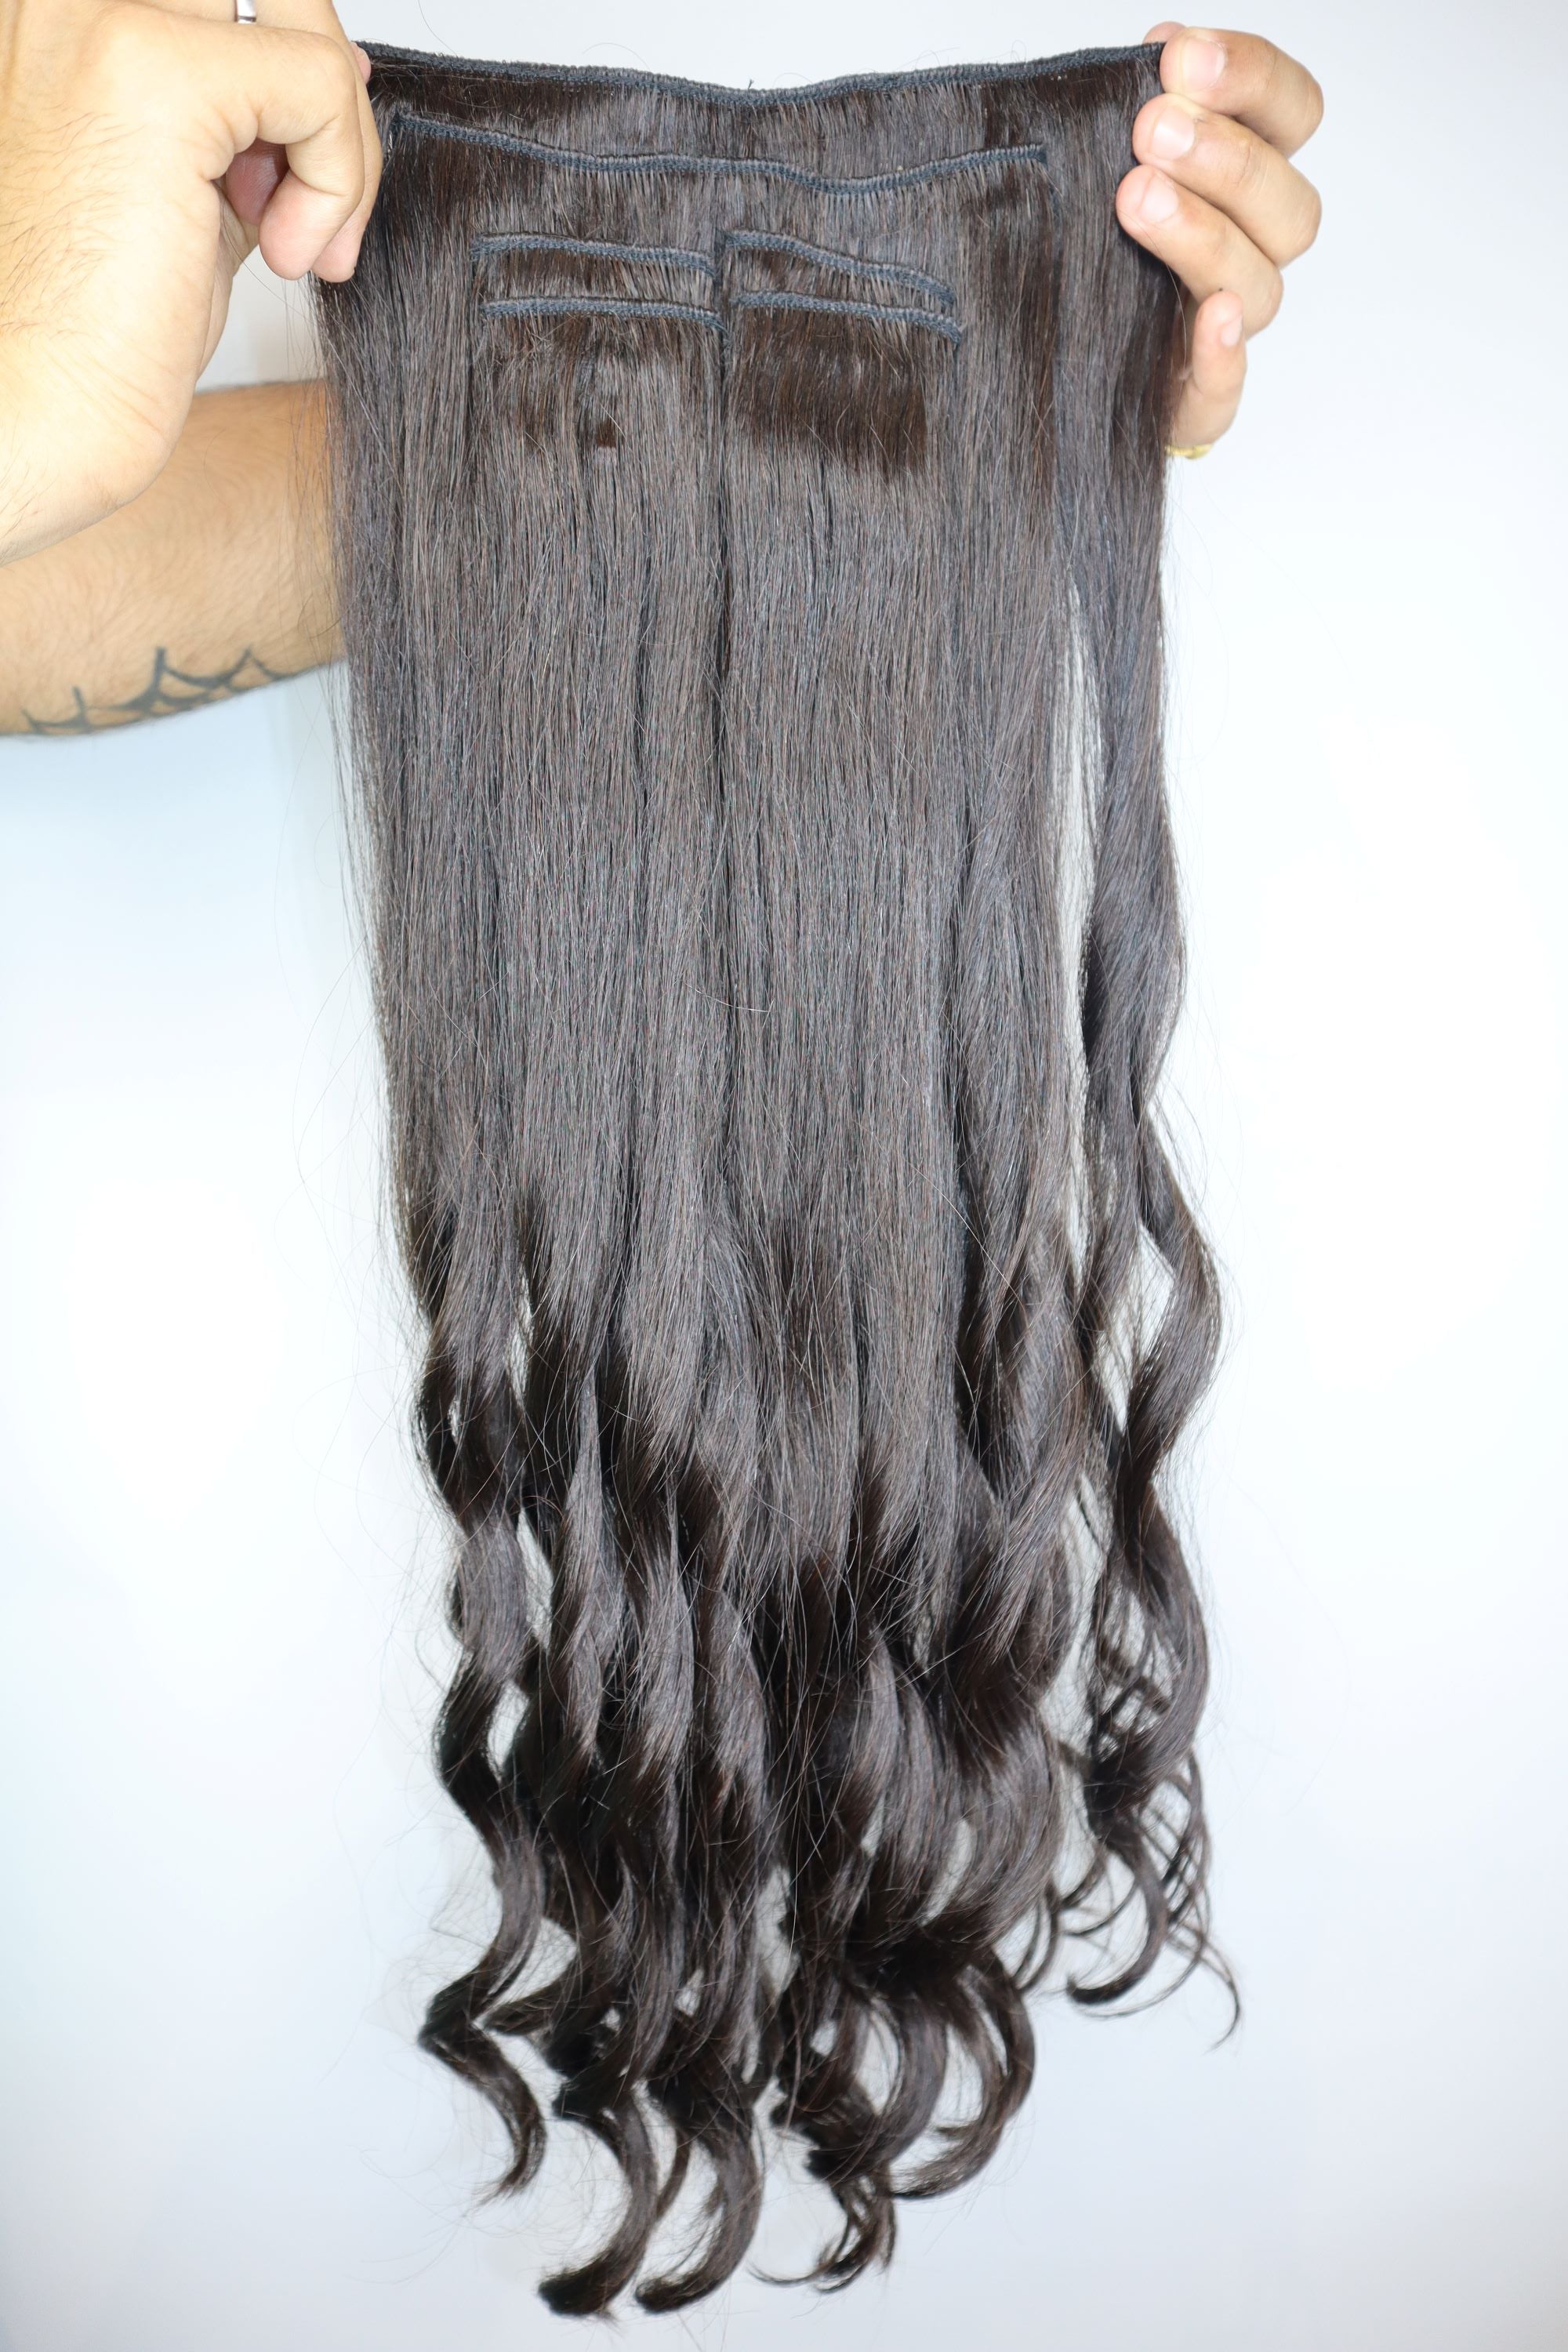 Clip  On Hair Extensions In Mumbai  Get Instant Length  Volume in  Minutes  YouTube